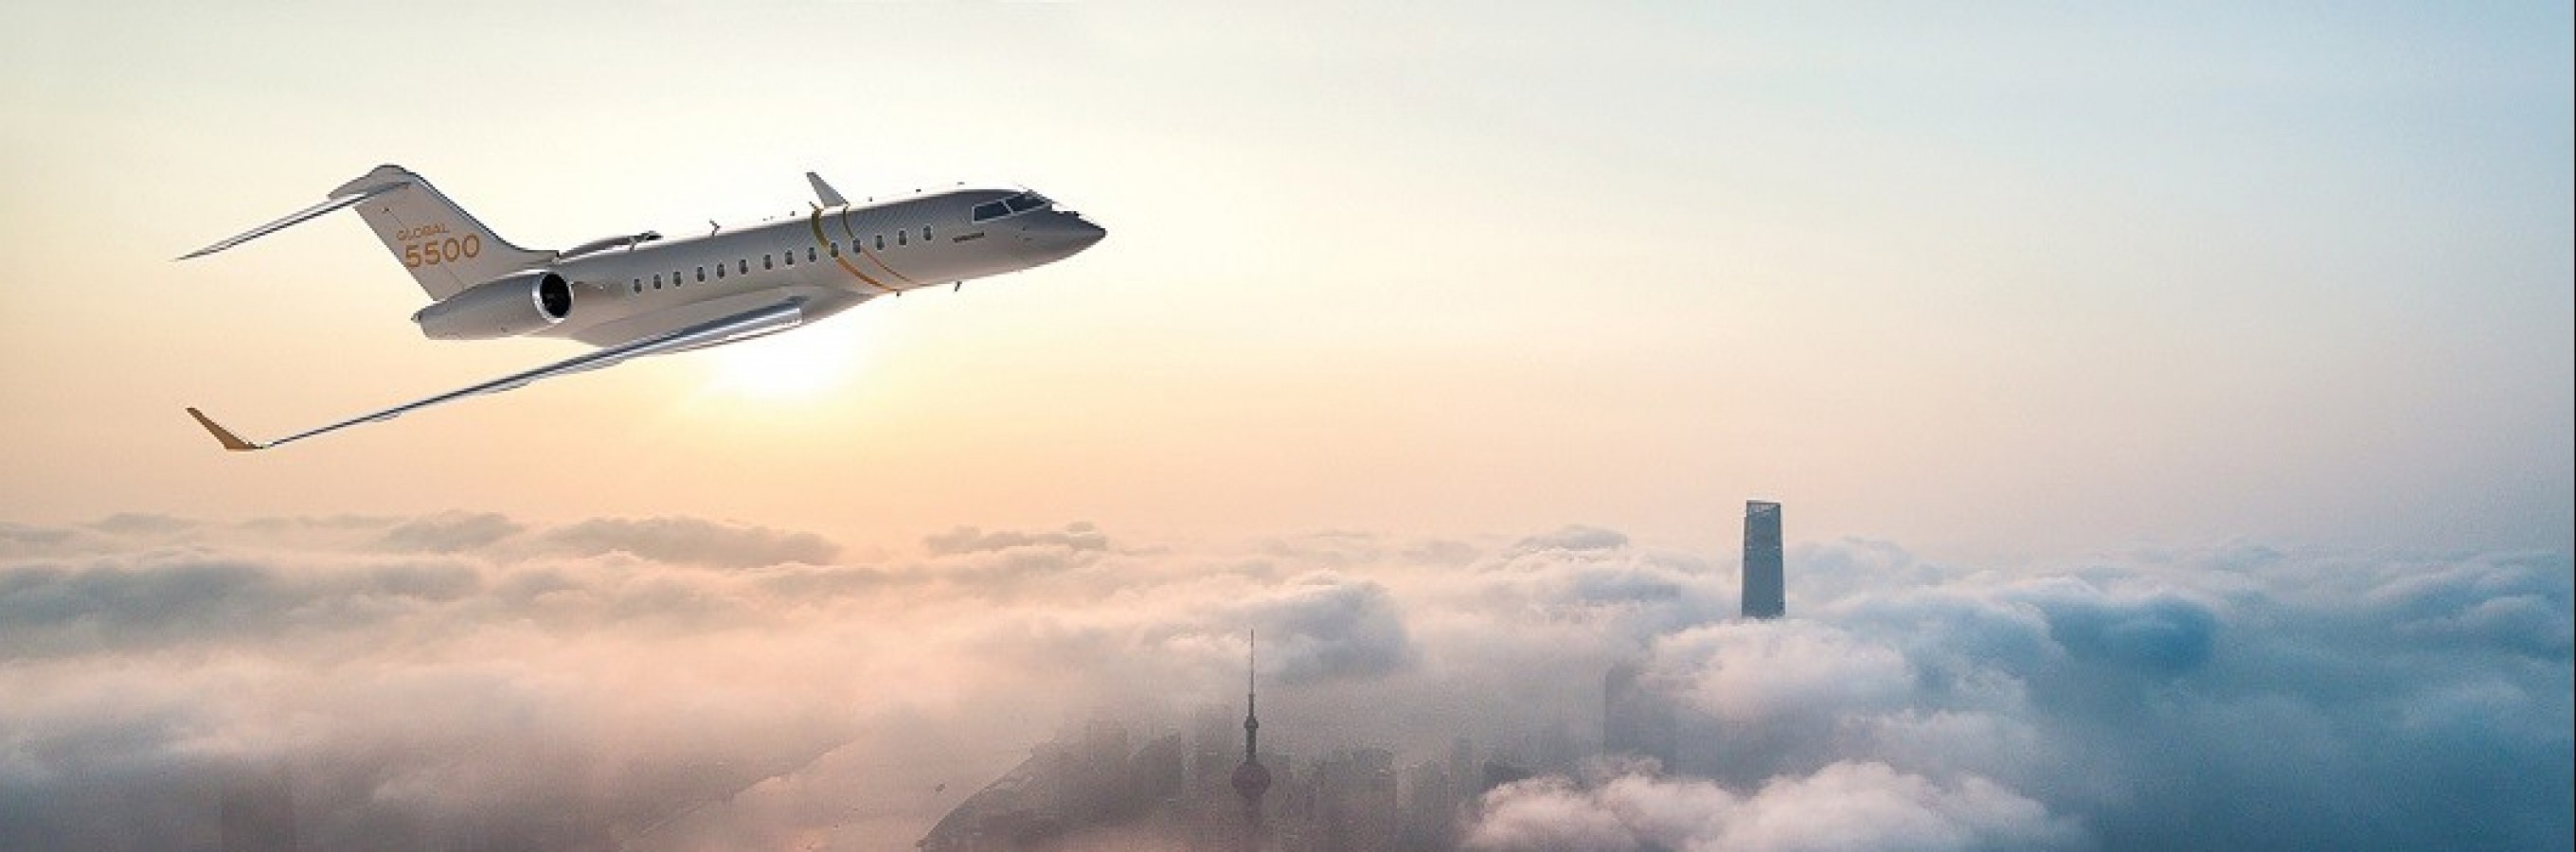 The Global 5500 jet soars above the clouds.